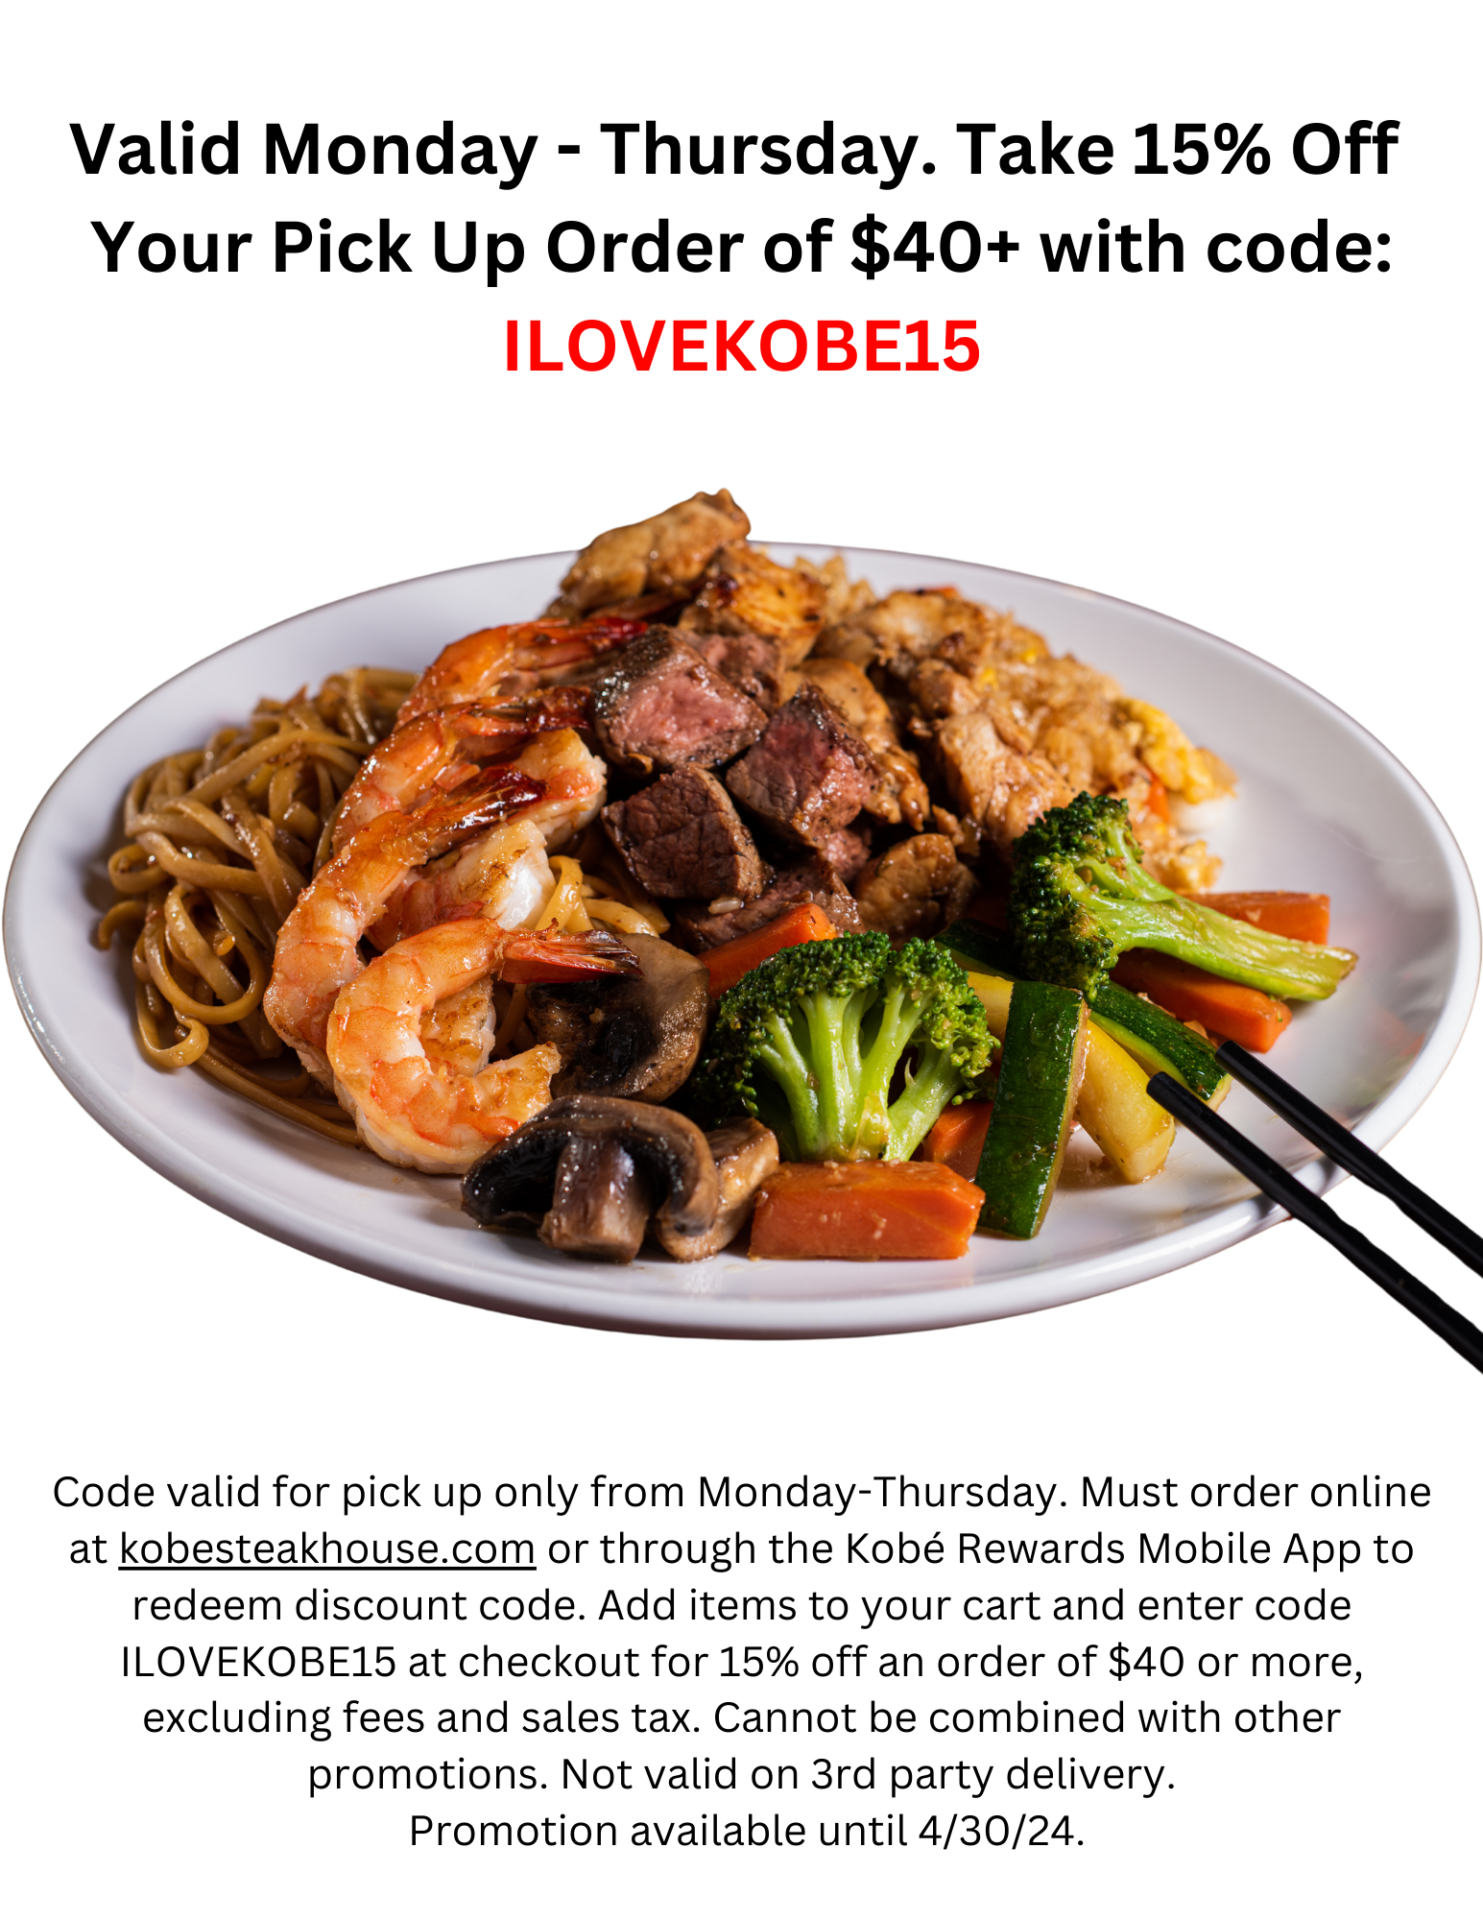 Valid Monday - Thursday. Take 15% Off Your Pick Up Order of $40+ with code: ILOVEKOBE15 Code valid for pick up only from Monday-Thursday. Must order online at kobesteakhouse.com or through the Kobé Rewards Mobile App to redeem discount code. Add items to your cart and enter code ILOVEKOBE15 at checkout for 15% off an order of $40 or more, excluding fees and sales tax. Cannot be combined with other promotions. Not valid on 3rd party delivery. Promotion available until 4/30/24. 